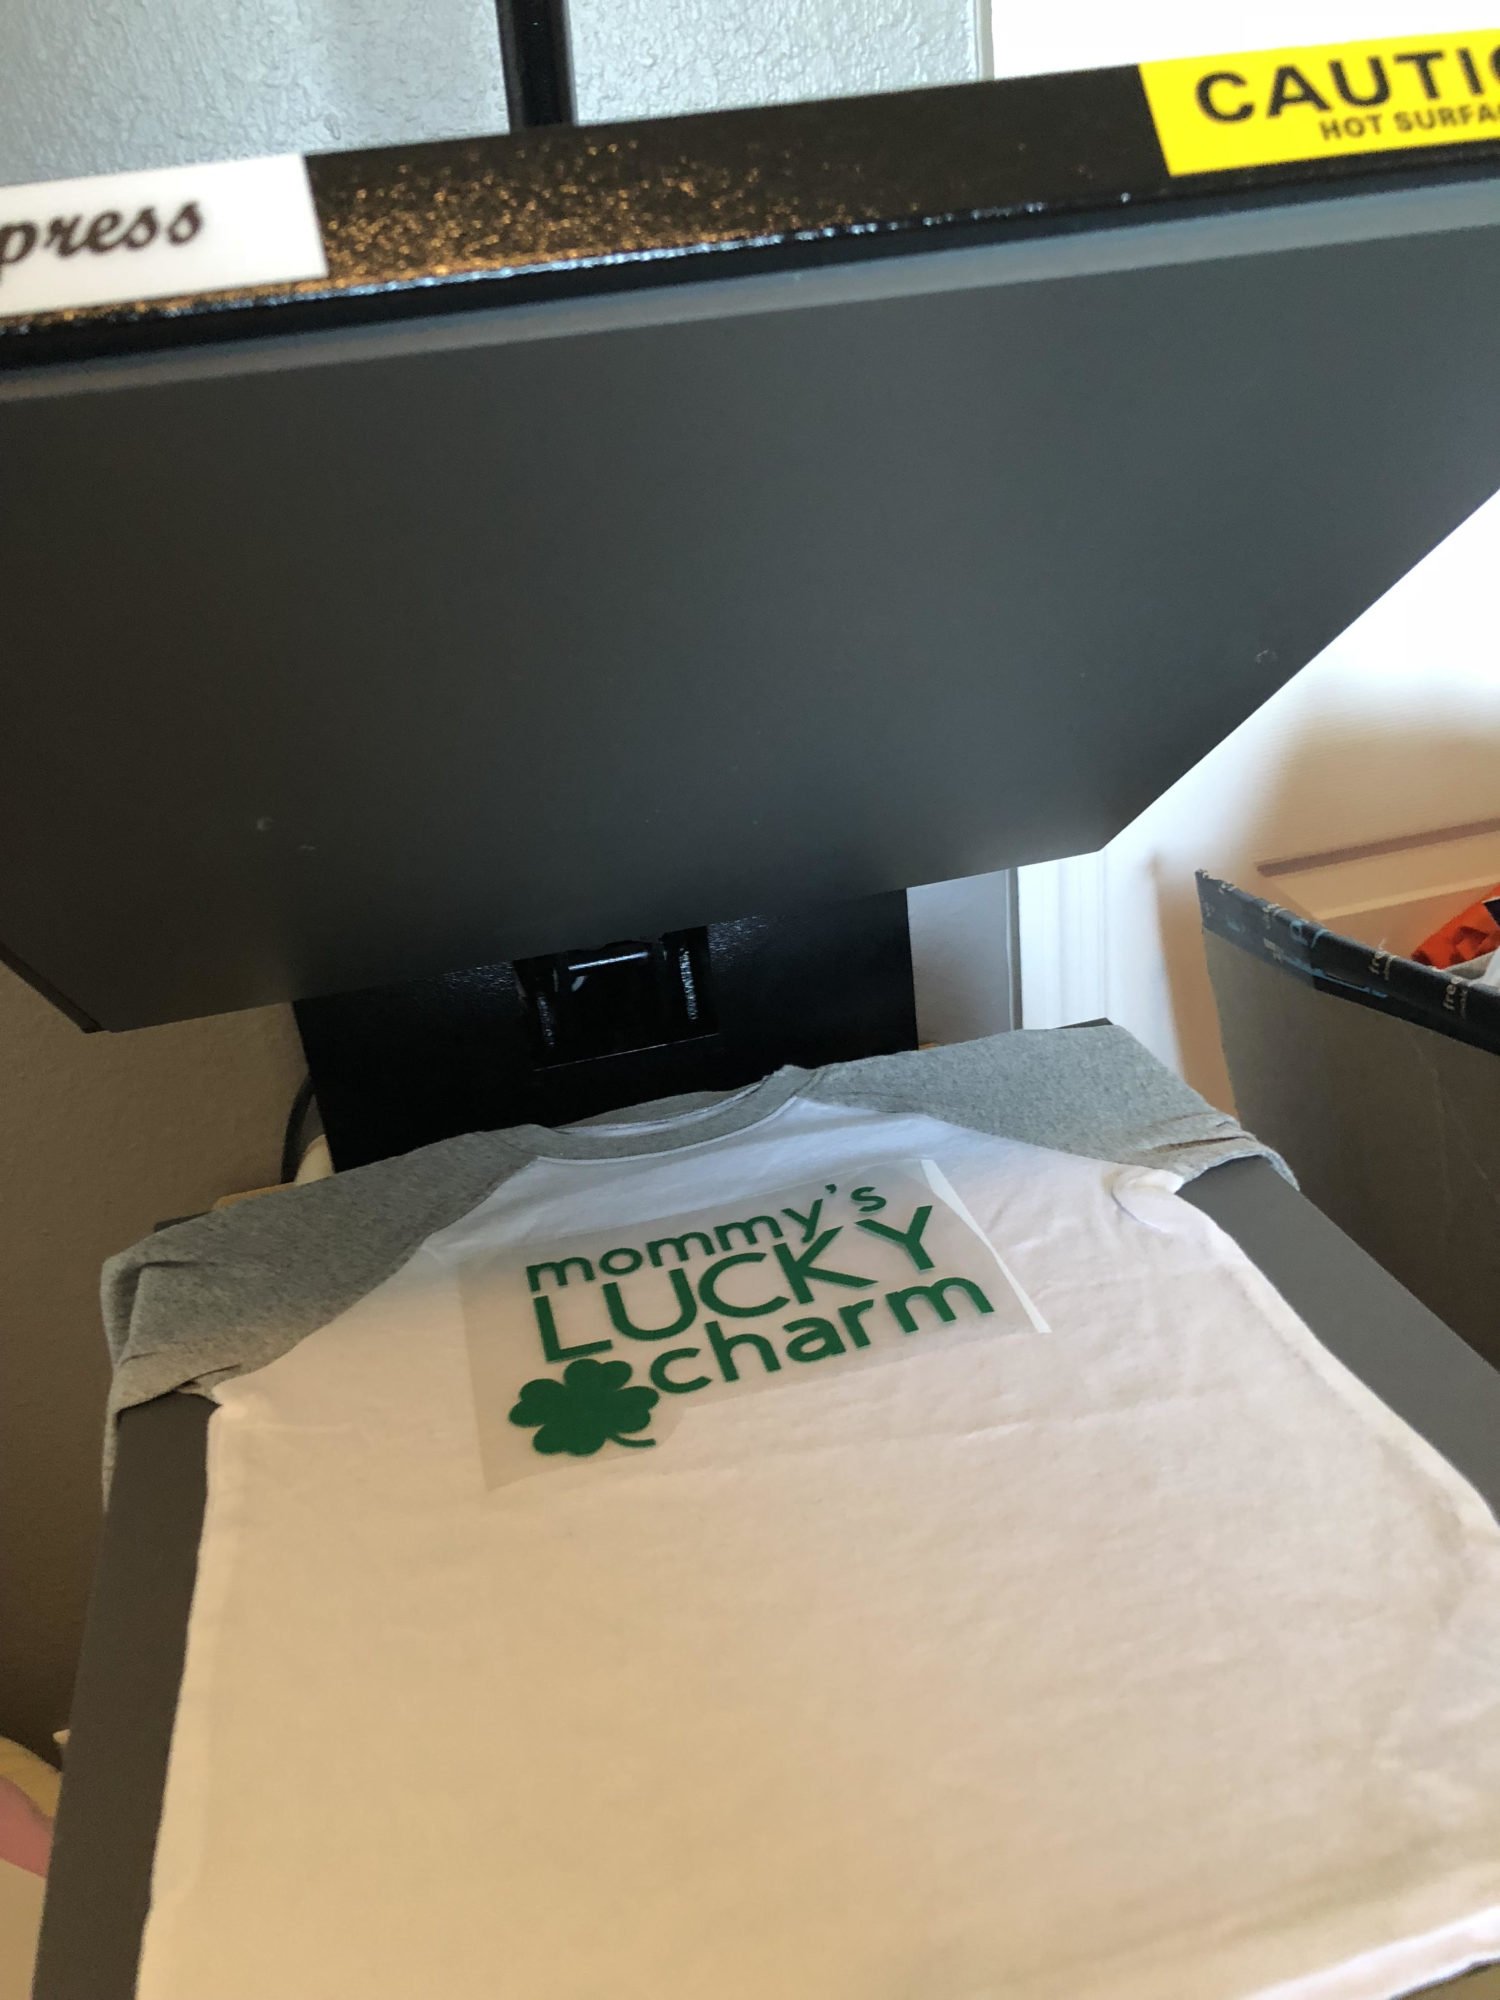 's Lucky Charm Iron-on T-Shirt